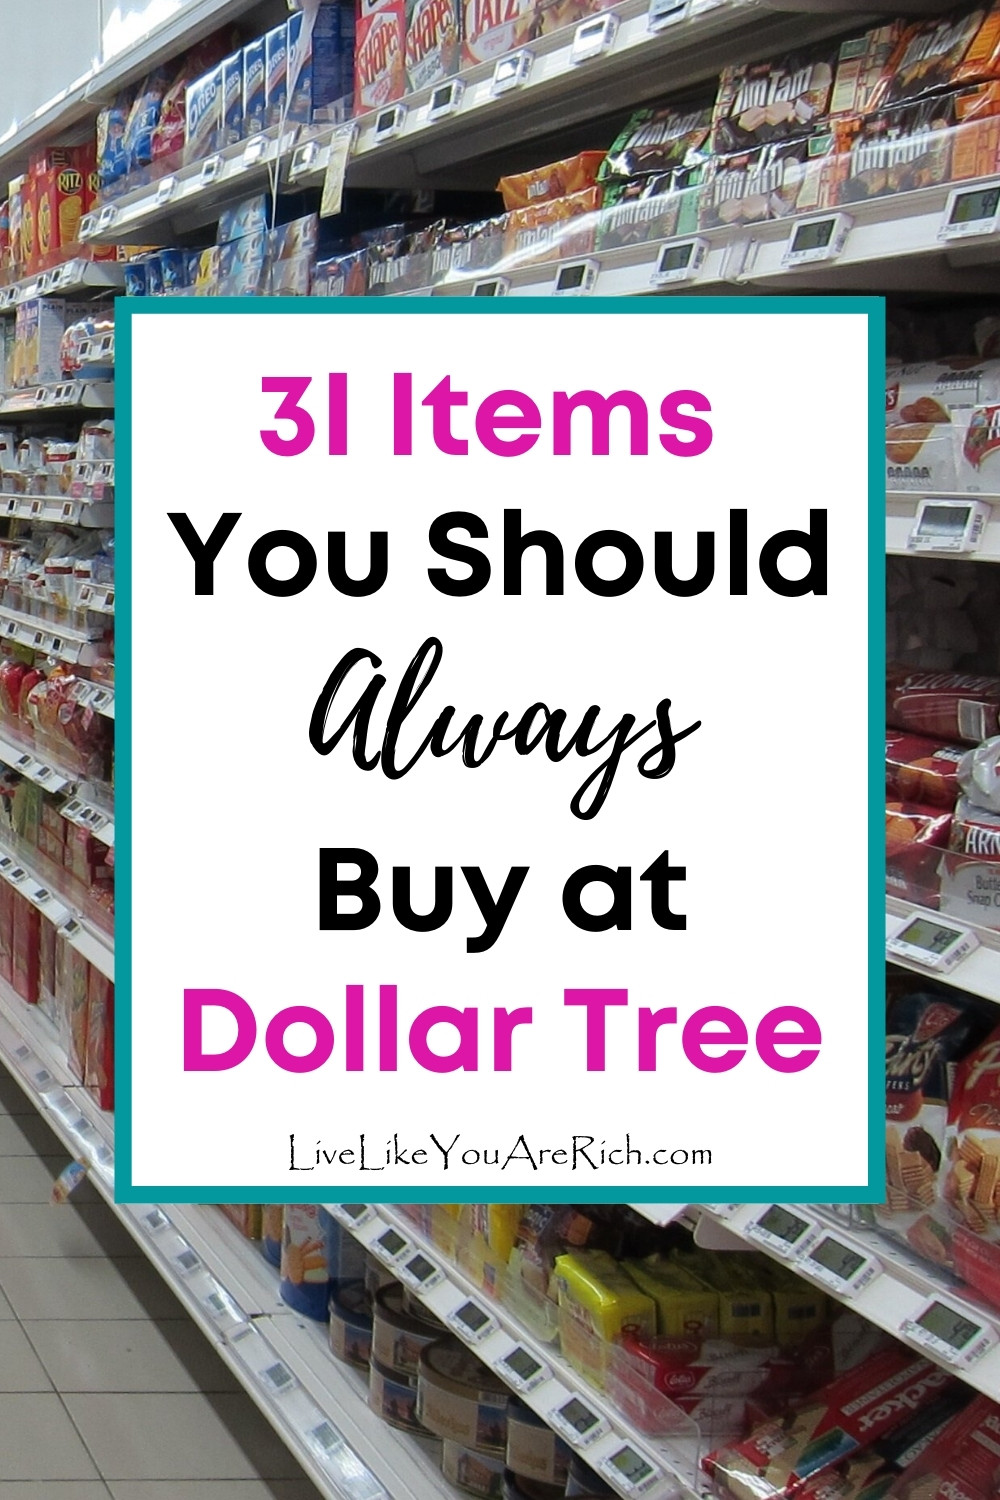 31 Items You Should Always Buy at Dollar Tree